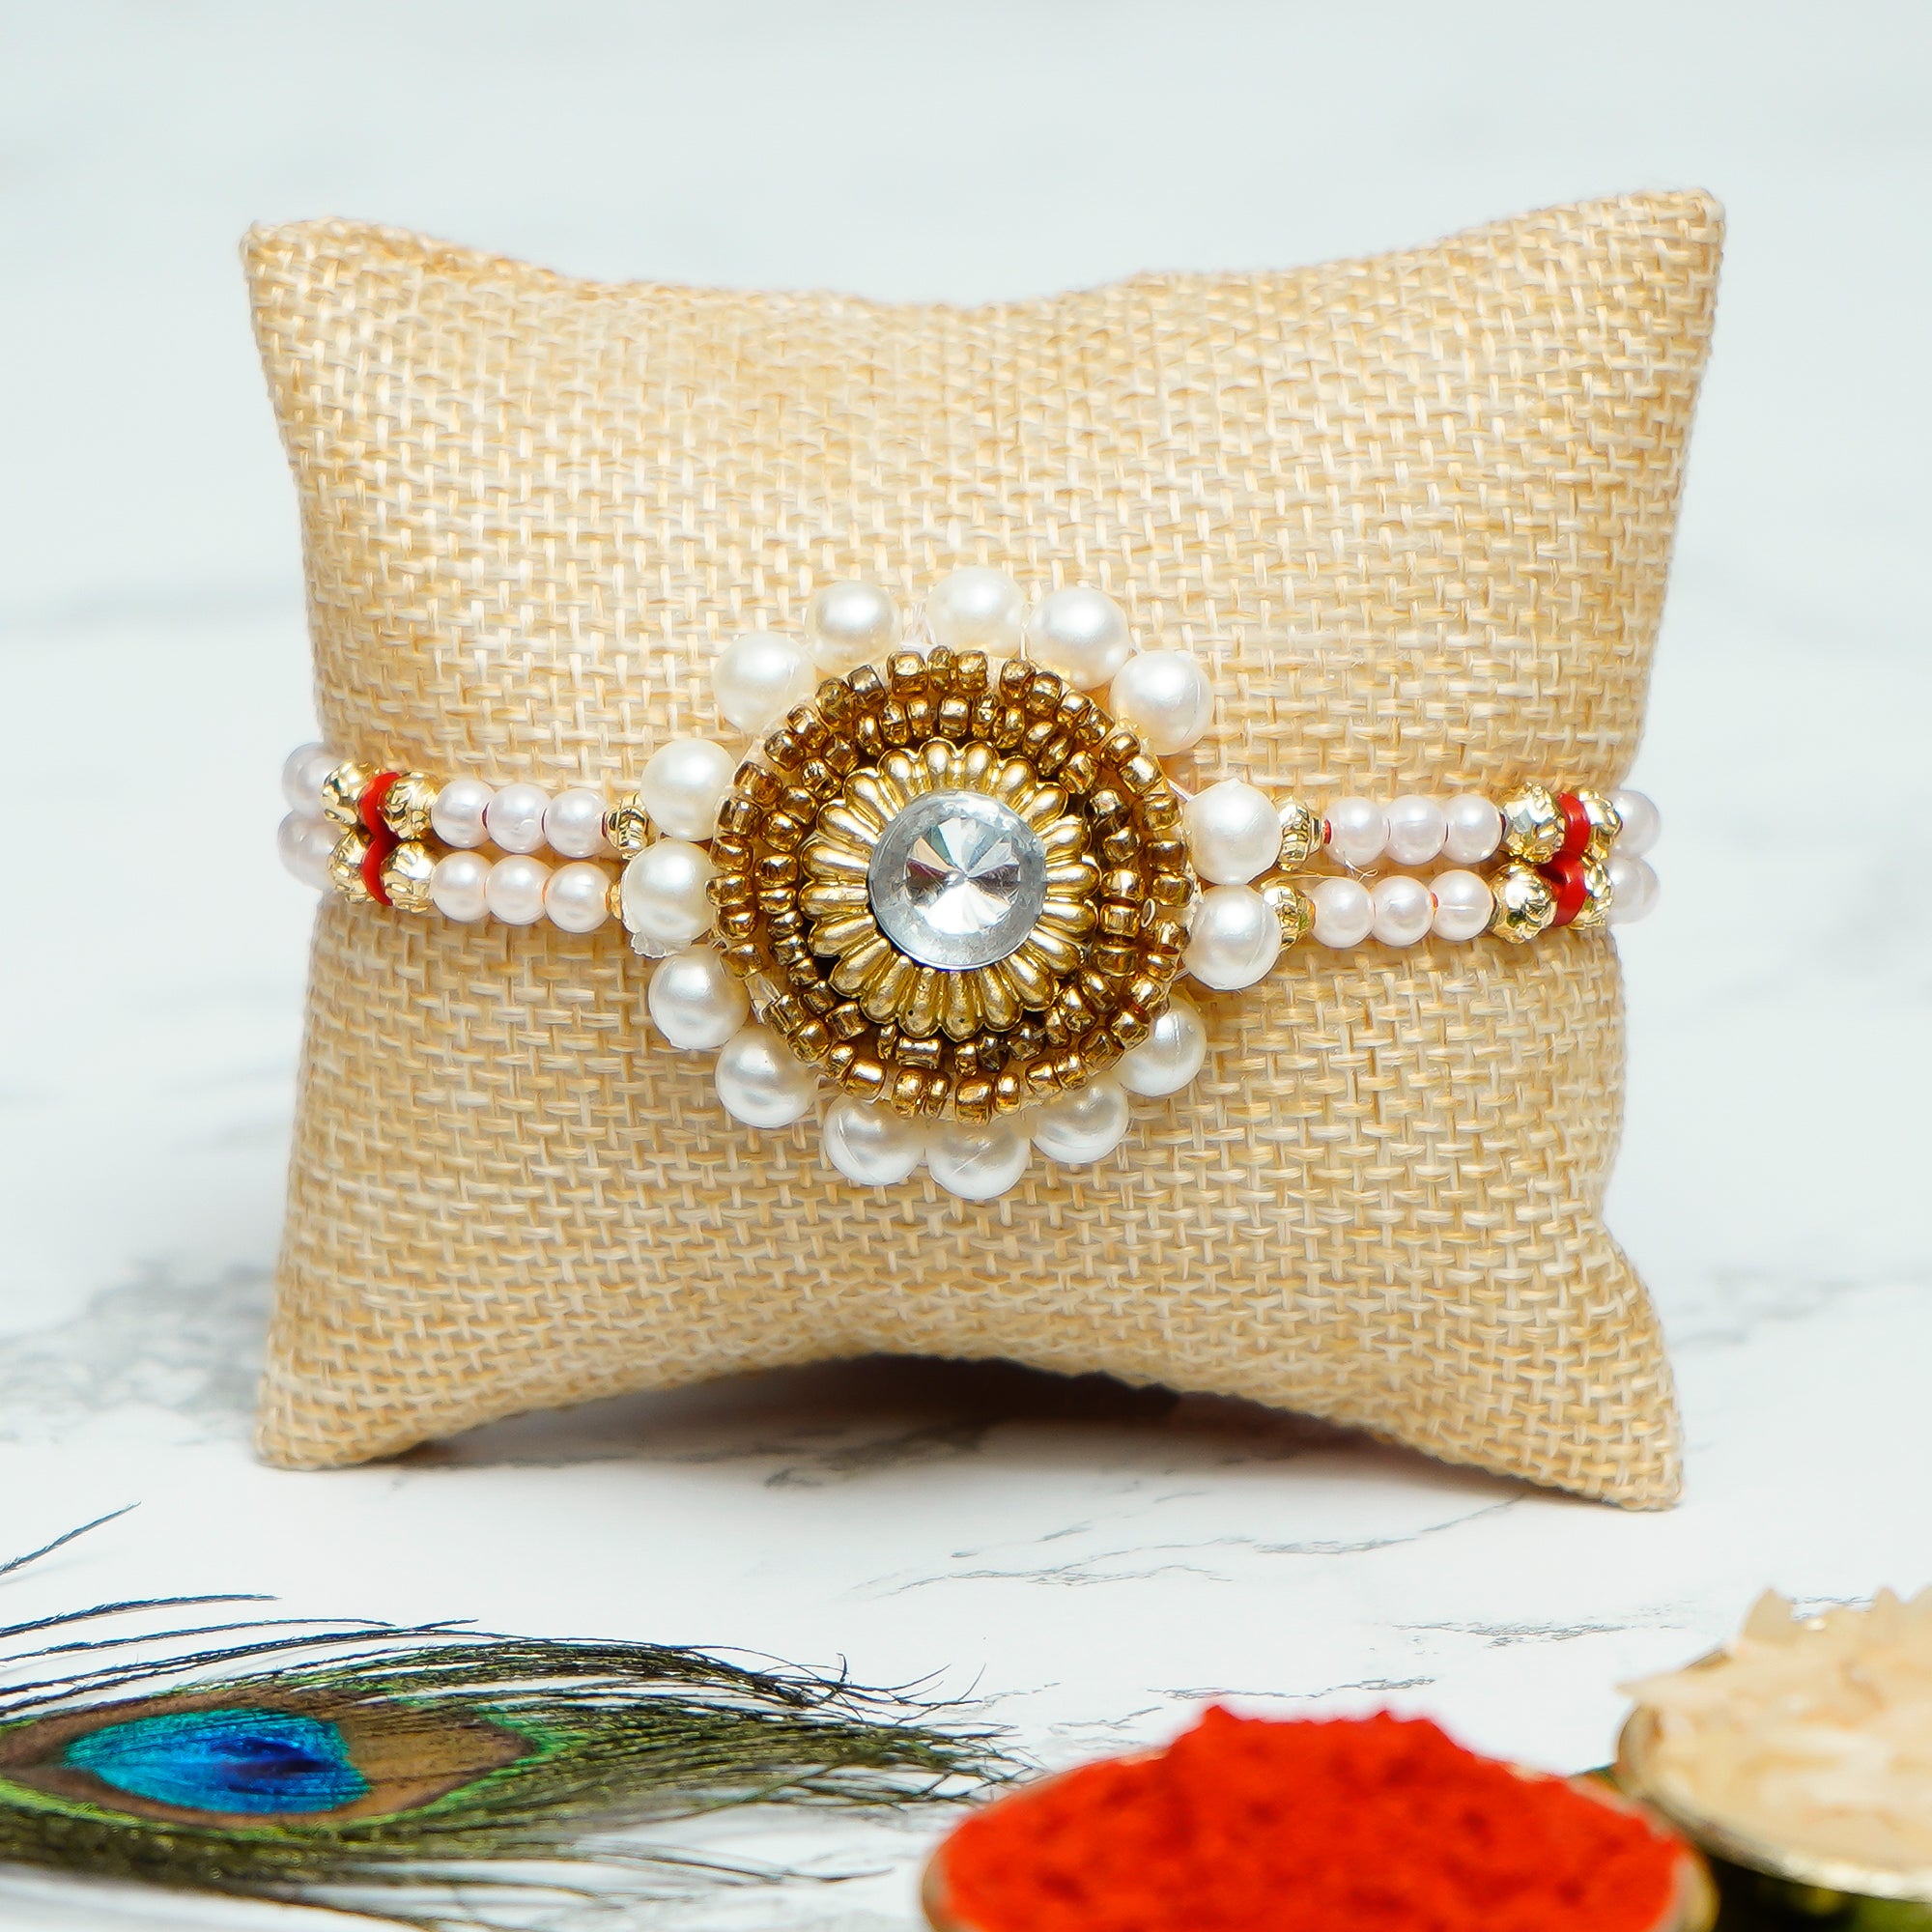 Designer Handcrafted Stone Pearl Rakhi with Brass Horse Tableware Antique Showpiece and Roli Chawal Pack, Best Wishes Greeting Card 1